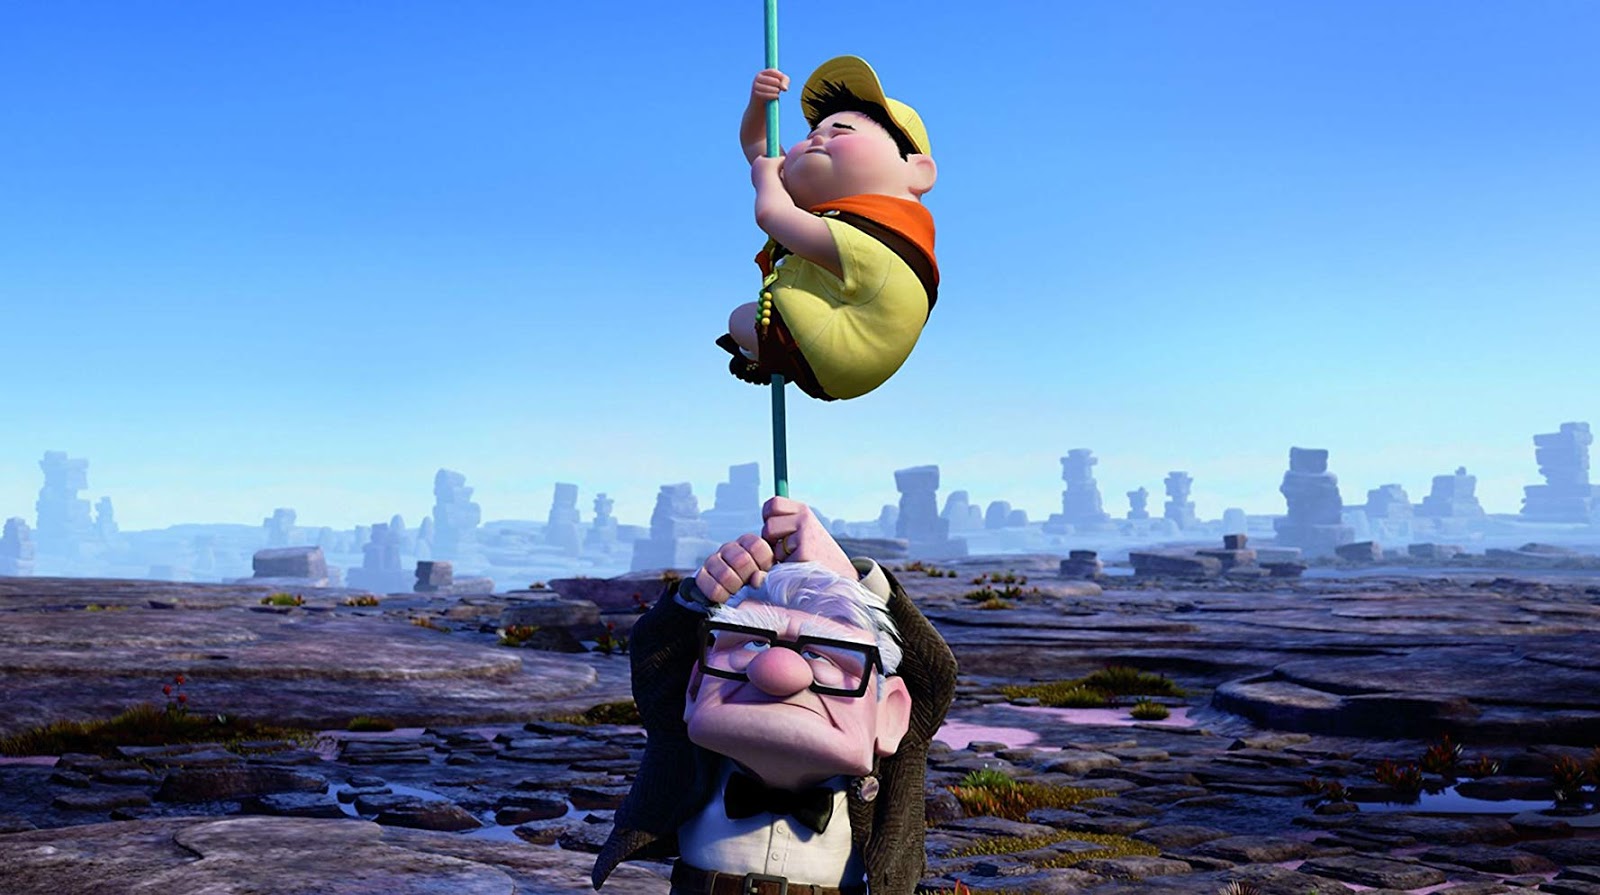 movie review on up